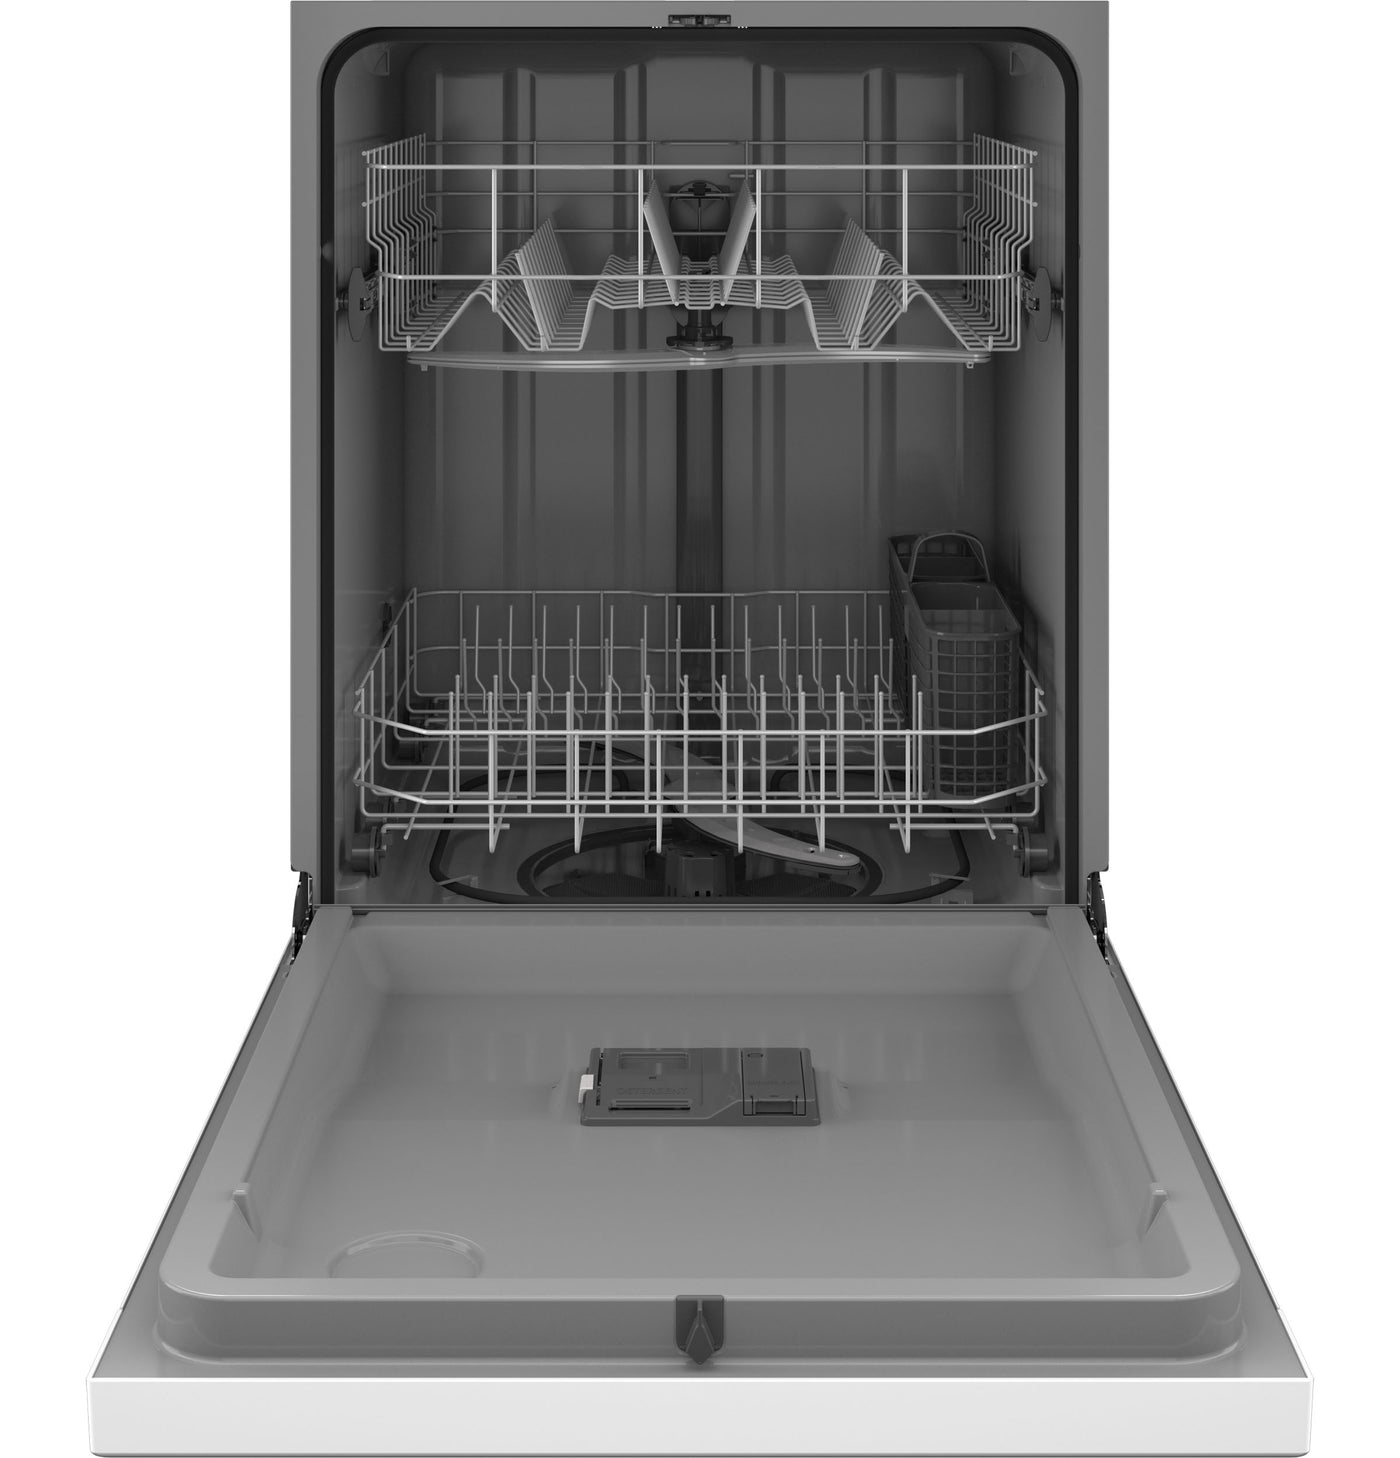 GE White 24" Built-In Front Control Dishwasher - GDF510PGRWW